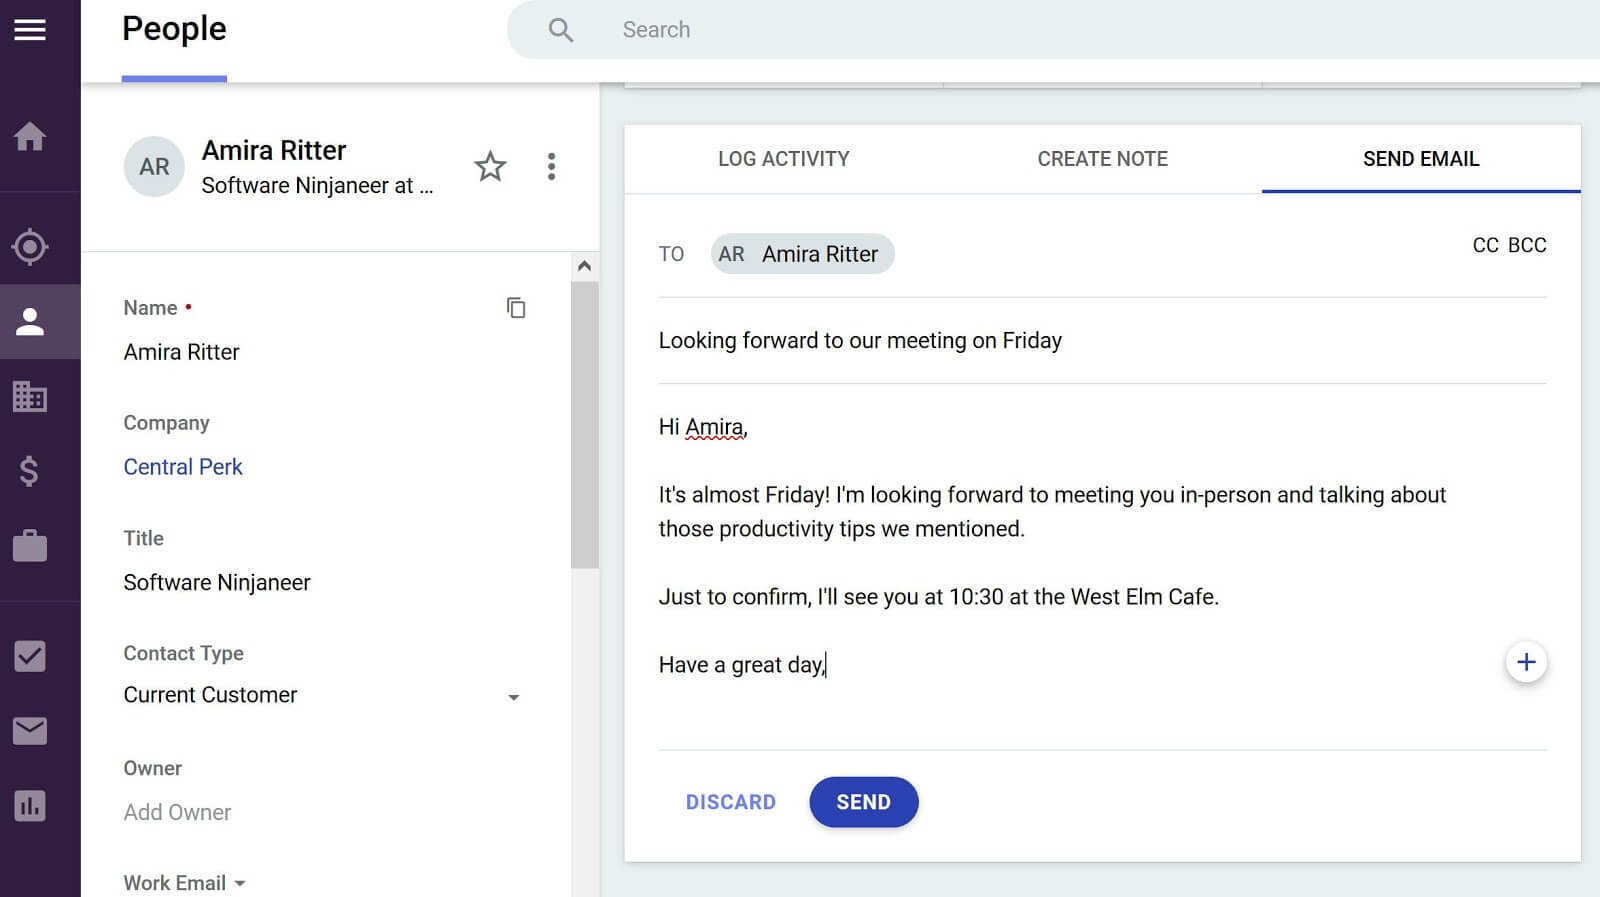 how to set an appointment - gmail integration